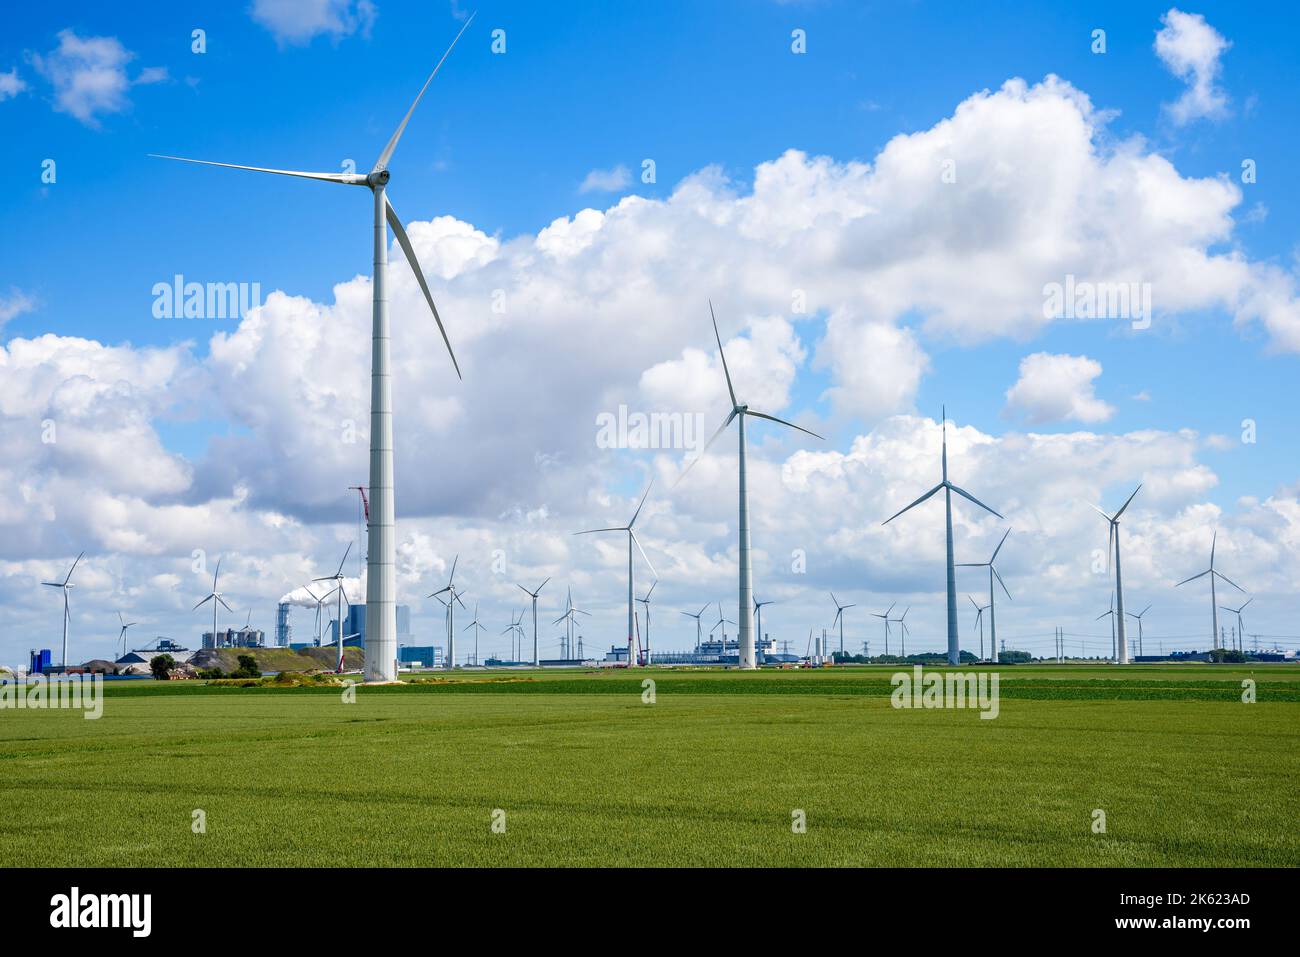 Wind farm in a field under blue sky with clouds. Coal-fired power plant is visible in background. Stock Photo